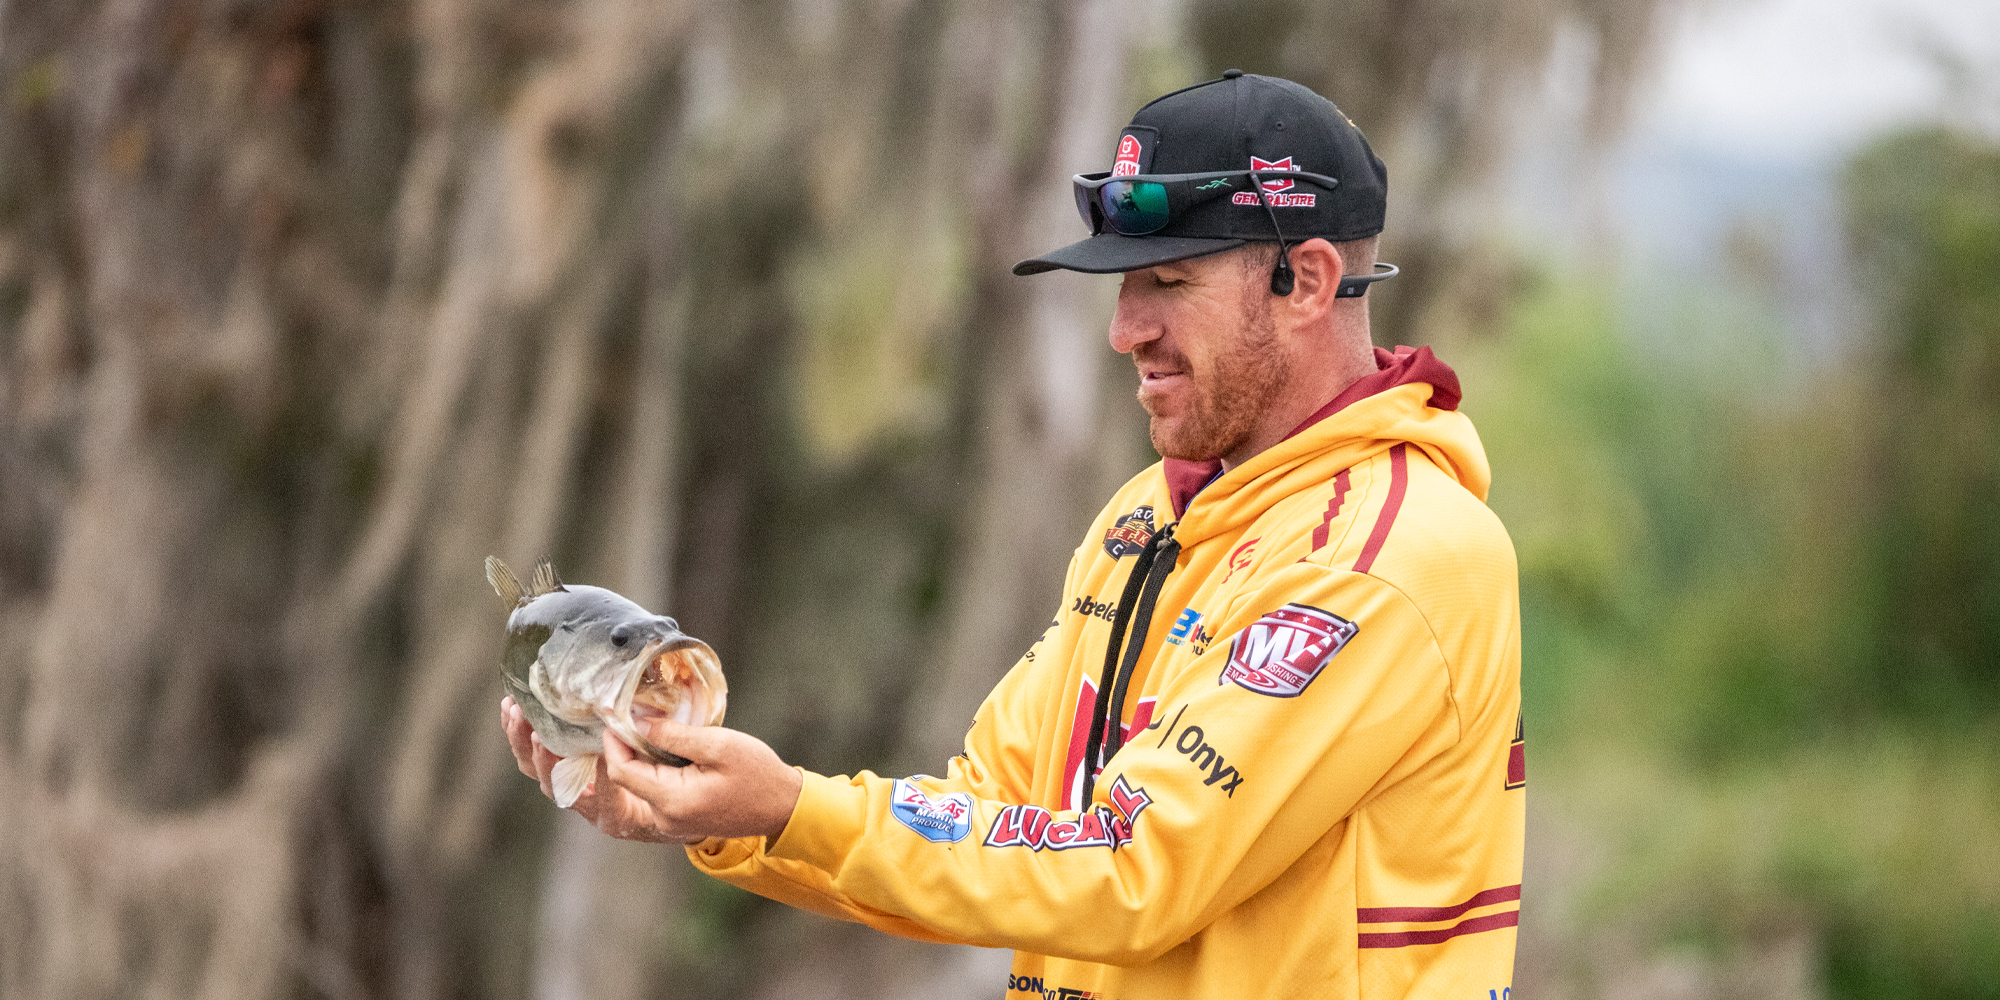 GALLERY: Team Crockett Creek wins Teams Series Championship with 133 pounds  - Major League Fishing